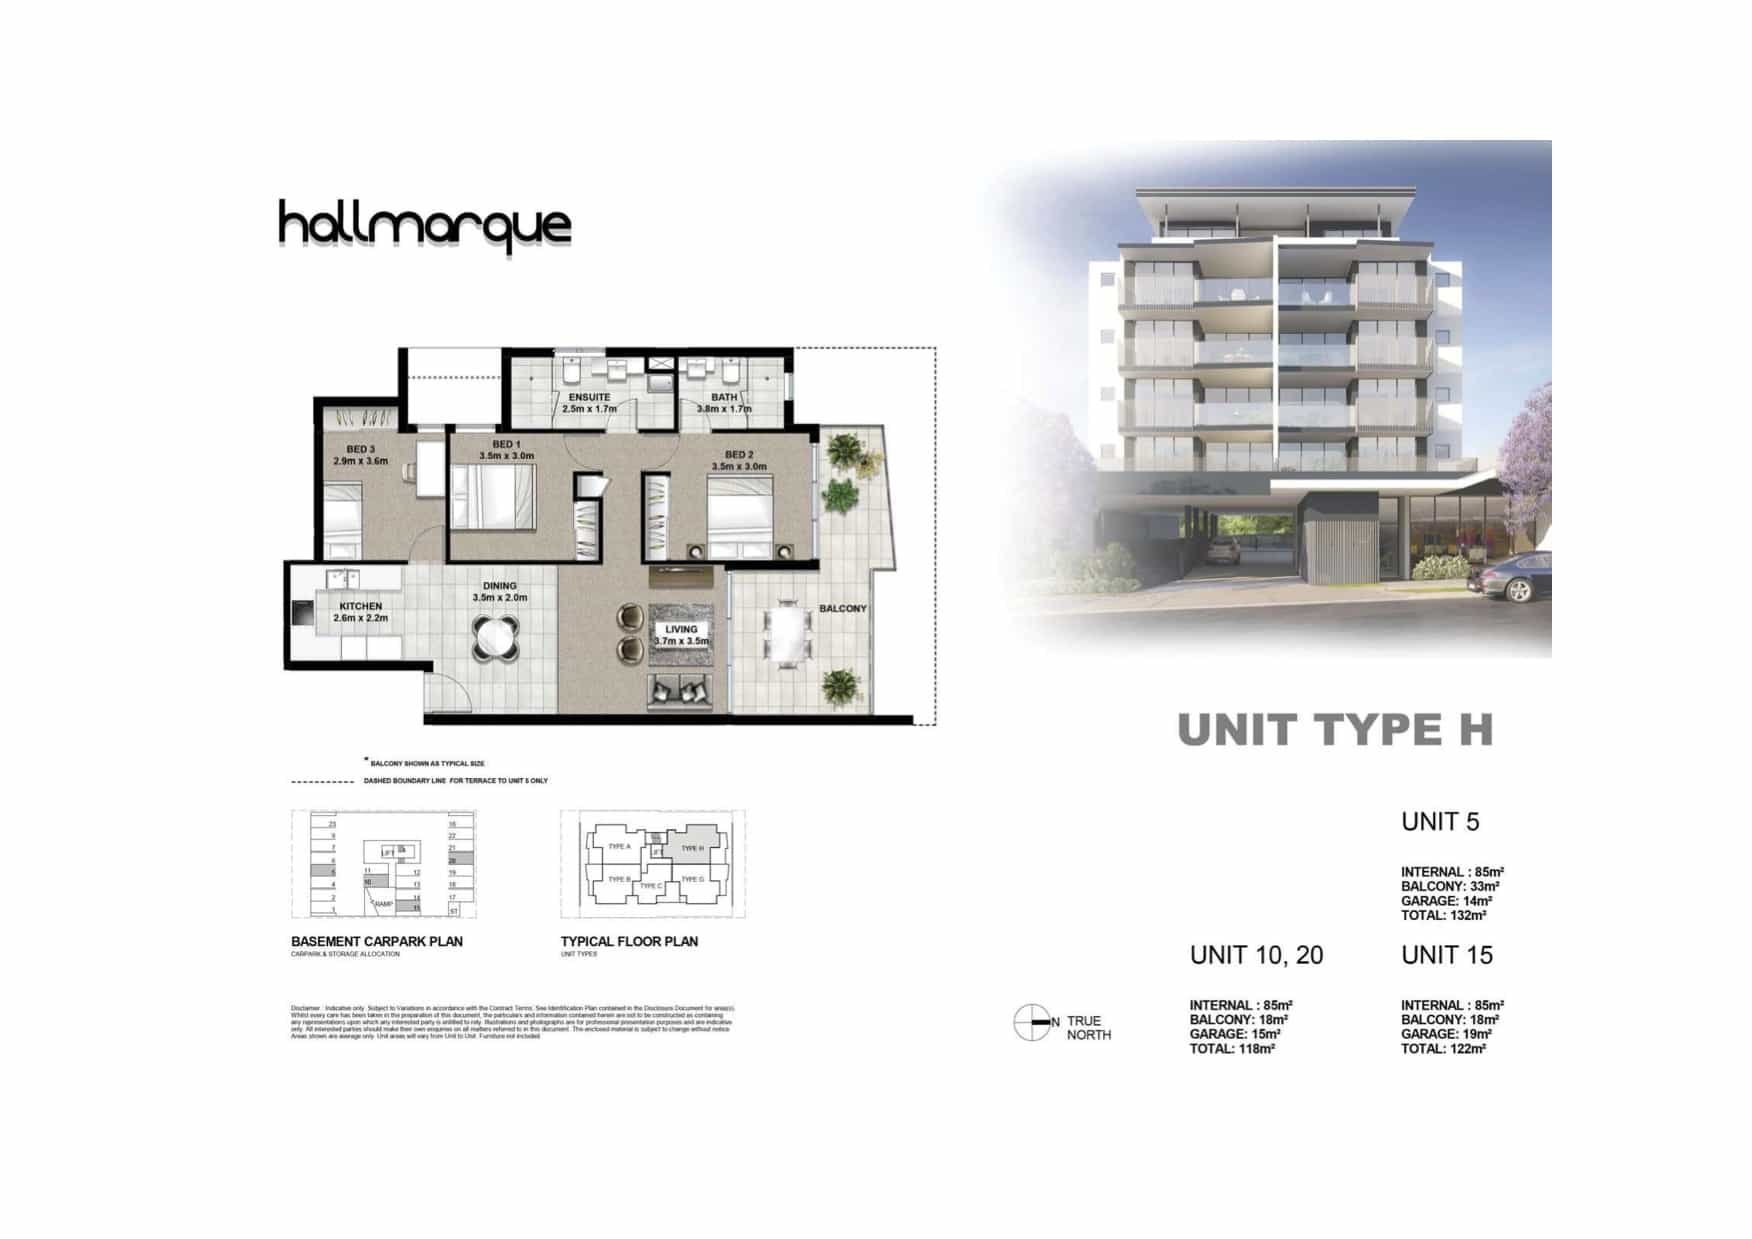 Hallmarque 3 Bedroom Apartment Brisbane with balcony access from bed and living